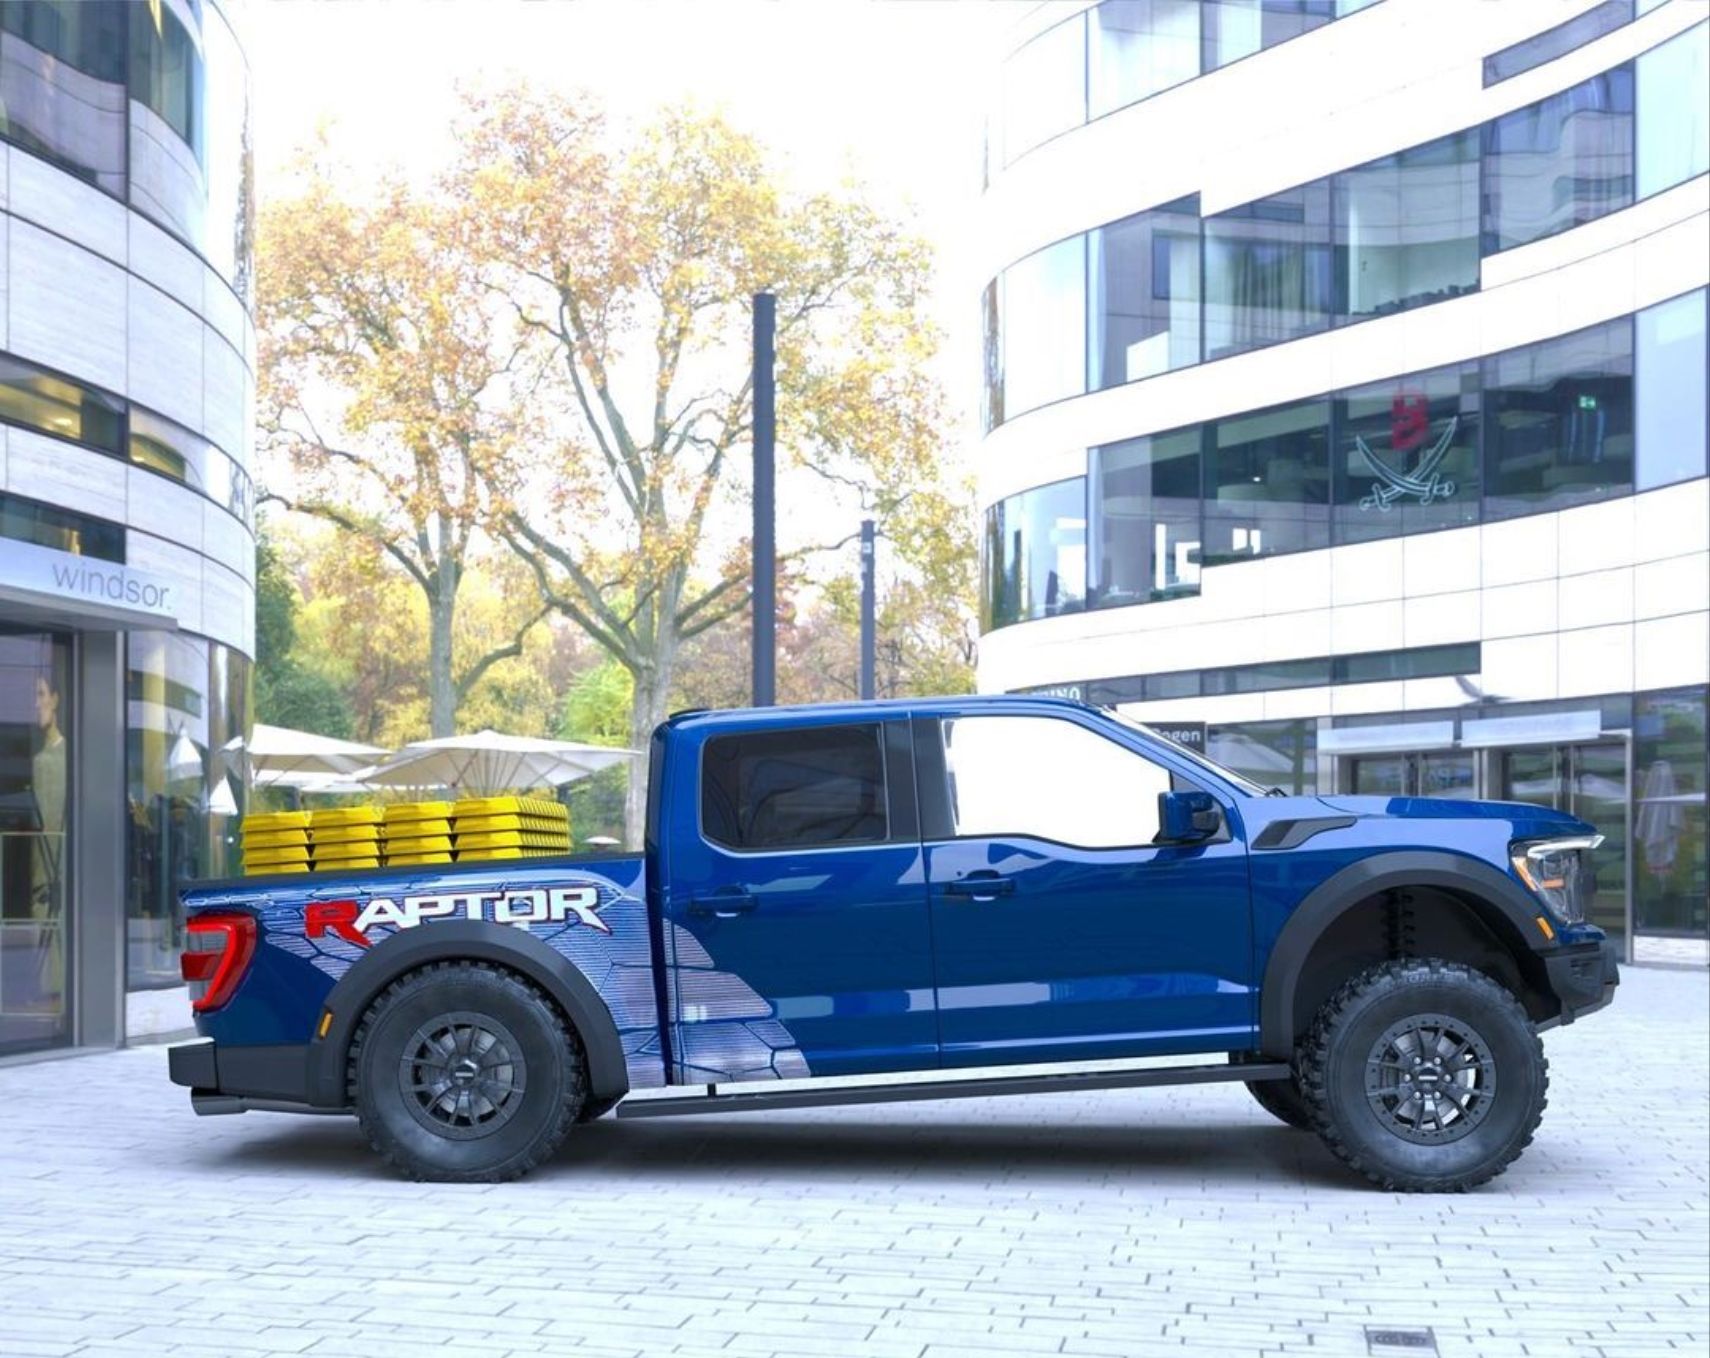 Ford's $109k F-150 Raptor R is 'brand's most powerful pickup' and